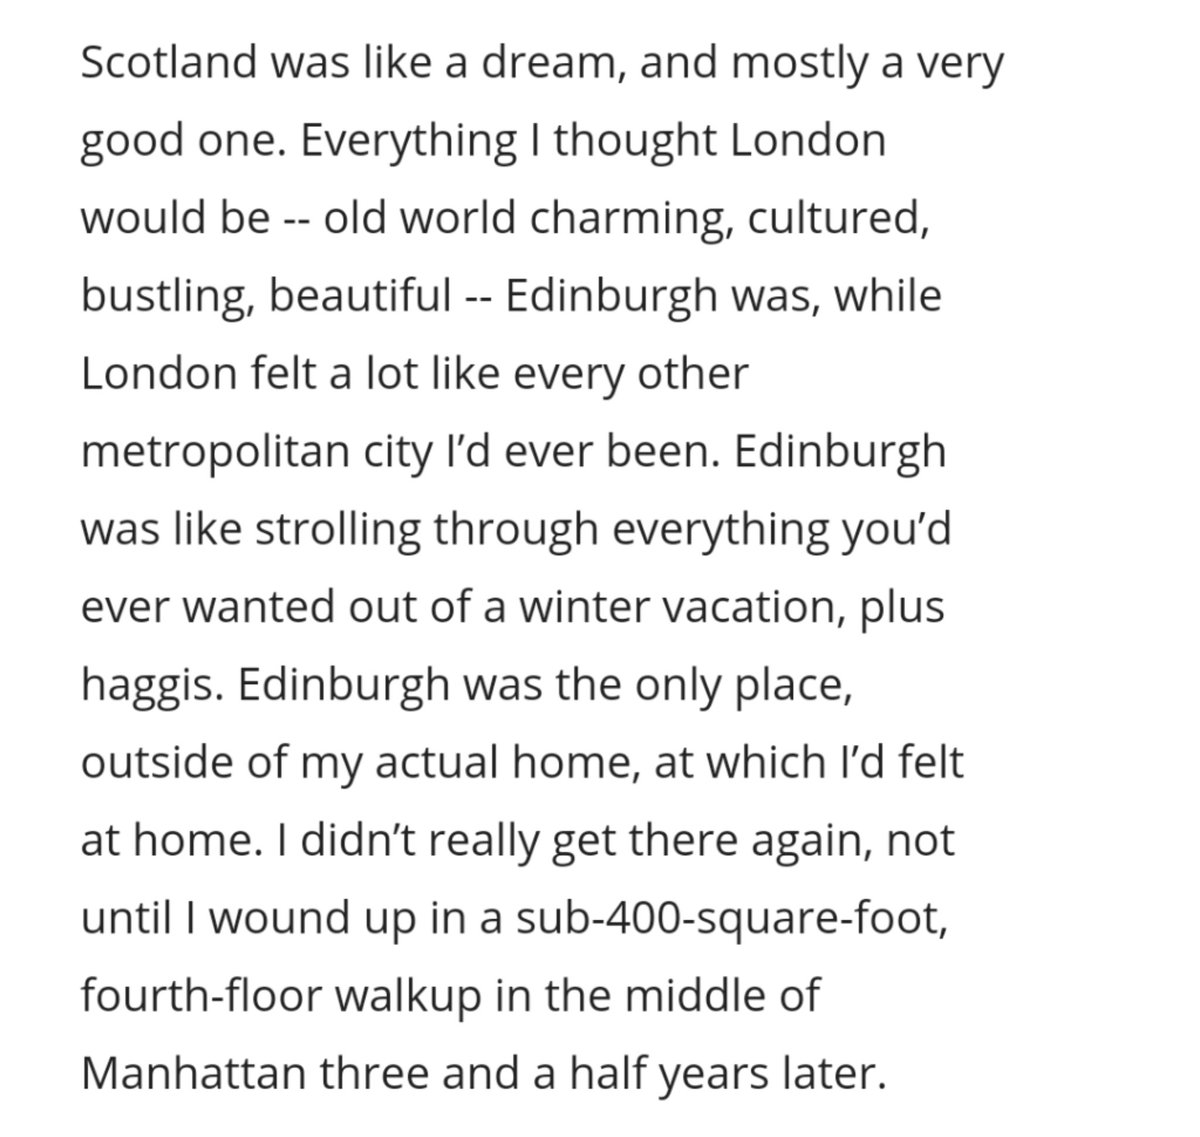 if you're wishing you were somewhere else today, check out  @AdmiralChristy's piece on our first issue about good memories & Scotland (where I've always wanted to go)  https://sites.google.com/view/distanceyrning/home#h.qbtyl0rivisa